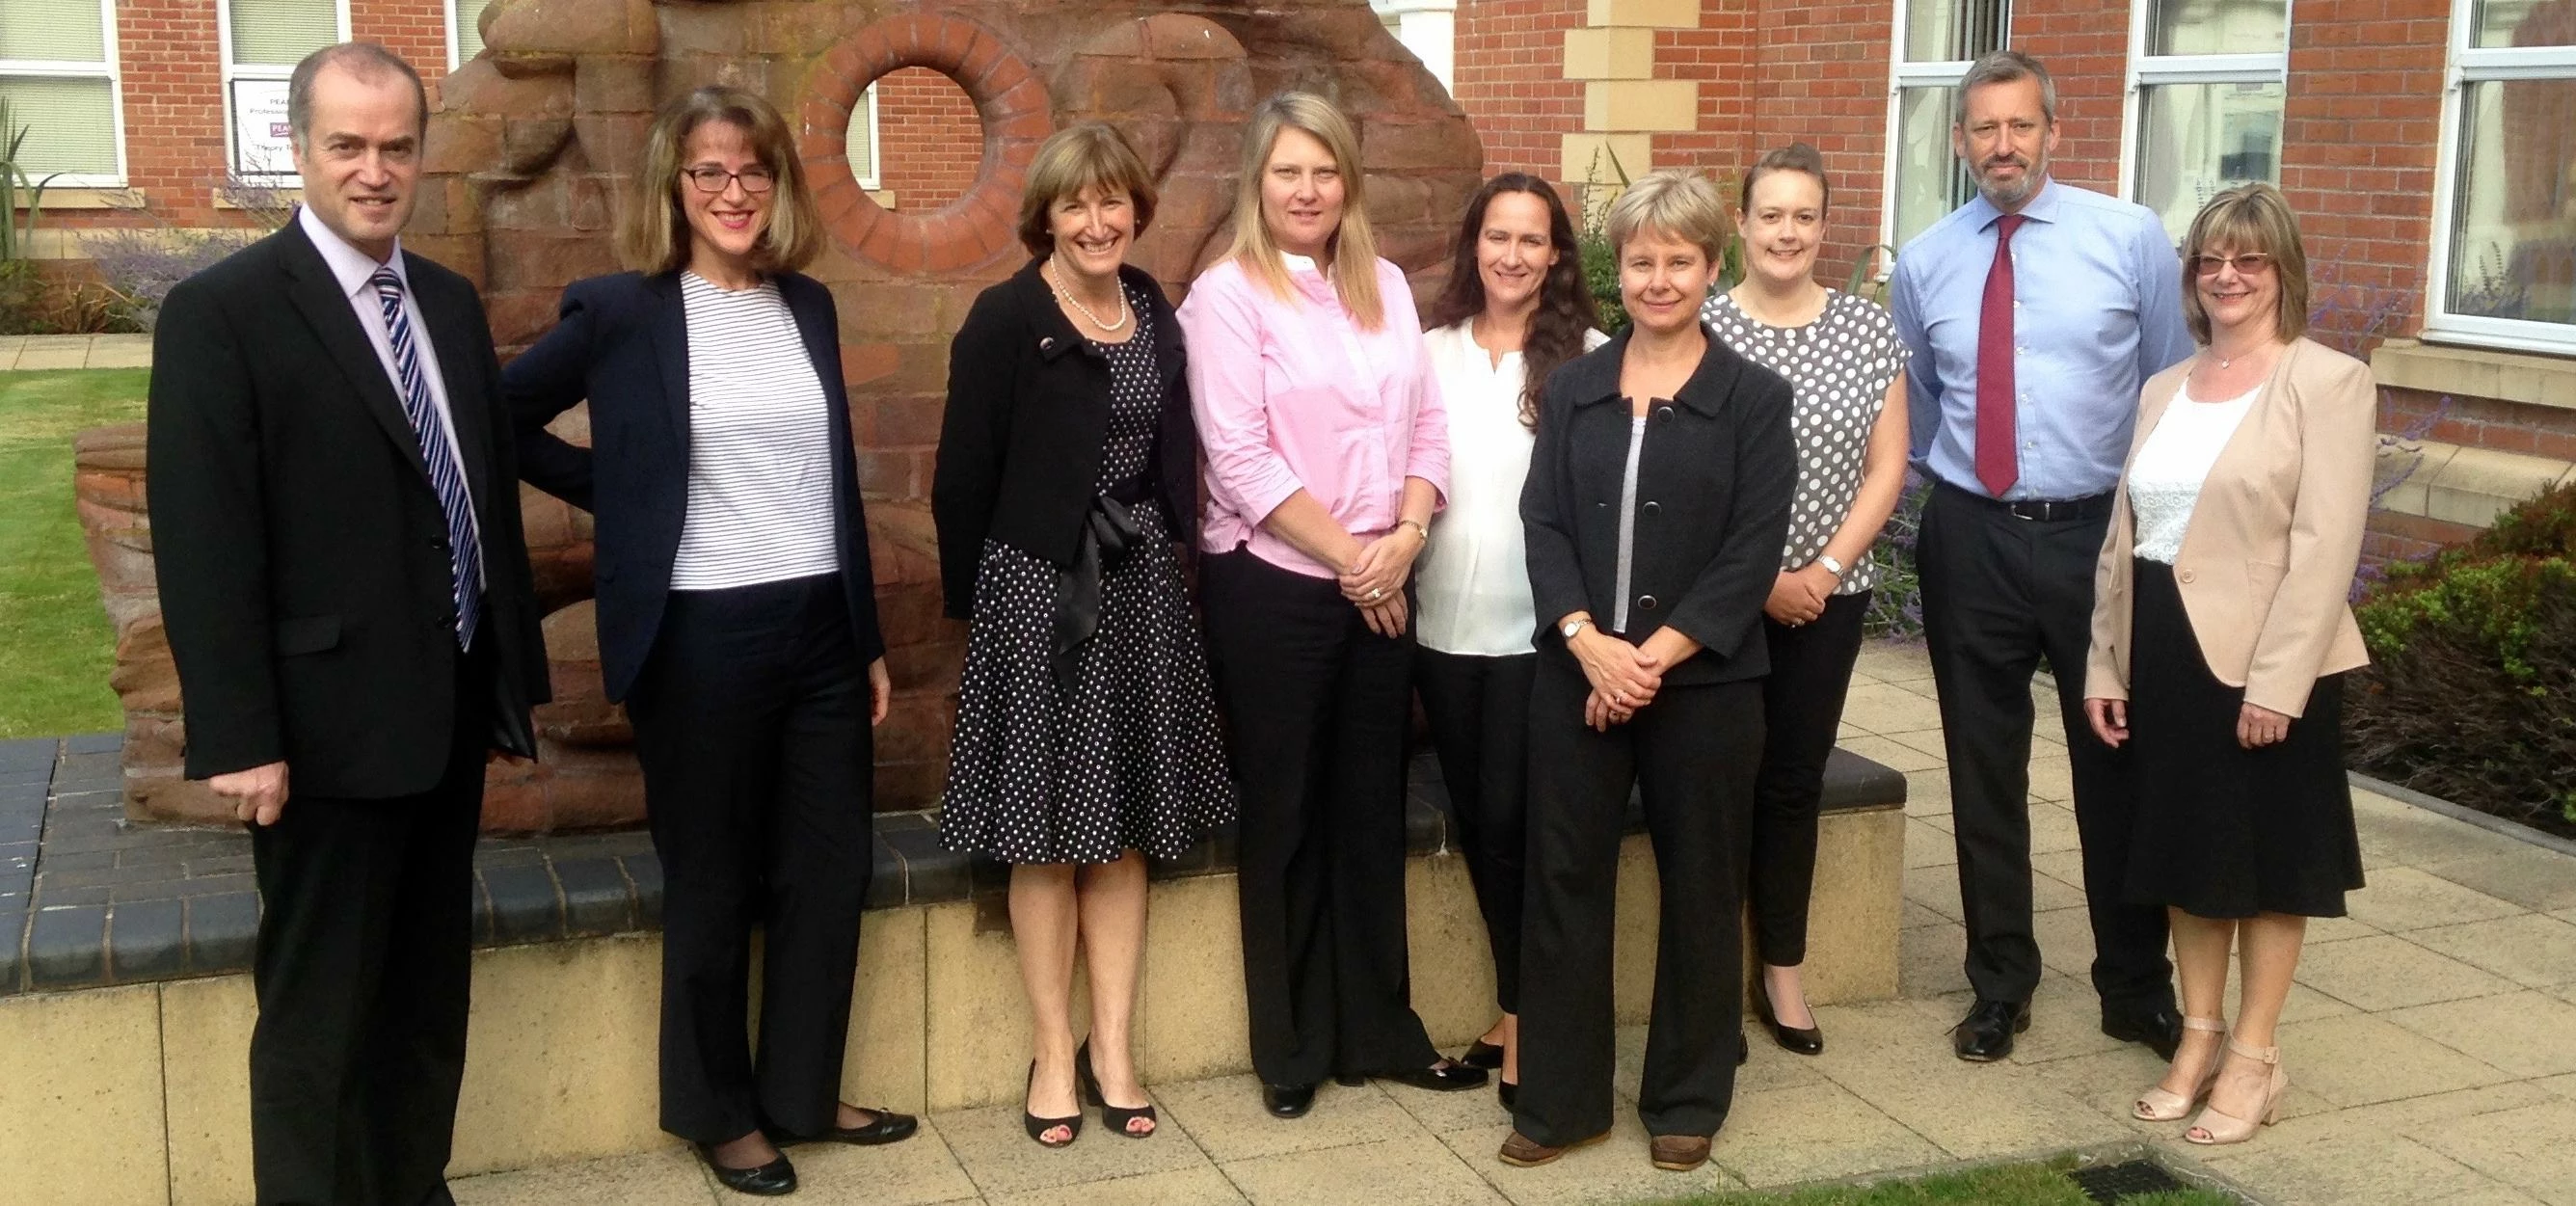 Sandy Edwards (centre) with the Shropshire Collaborative Lawyers POD having been appointed Liaison O